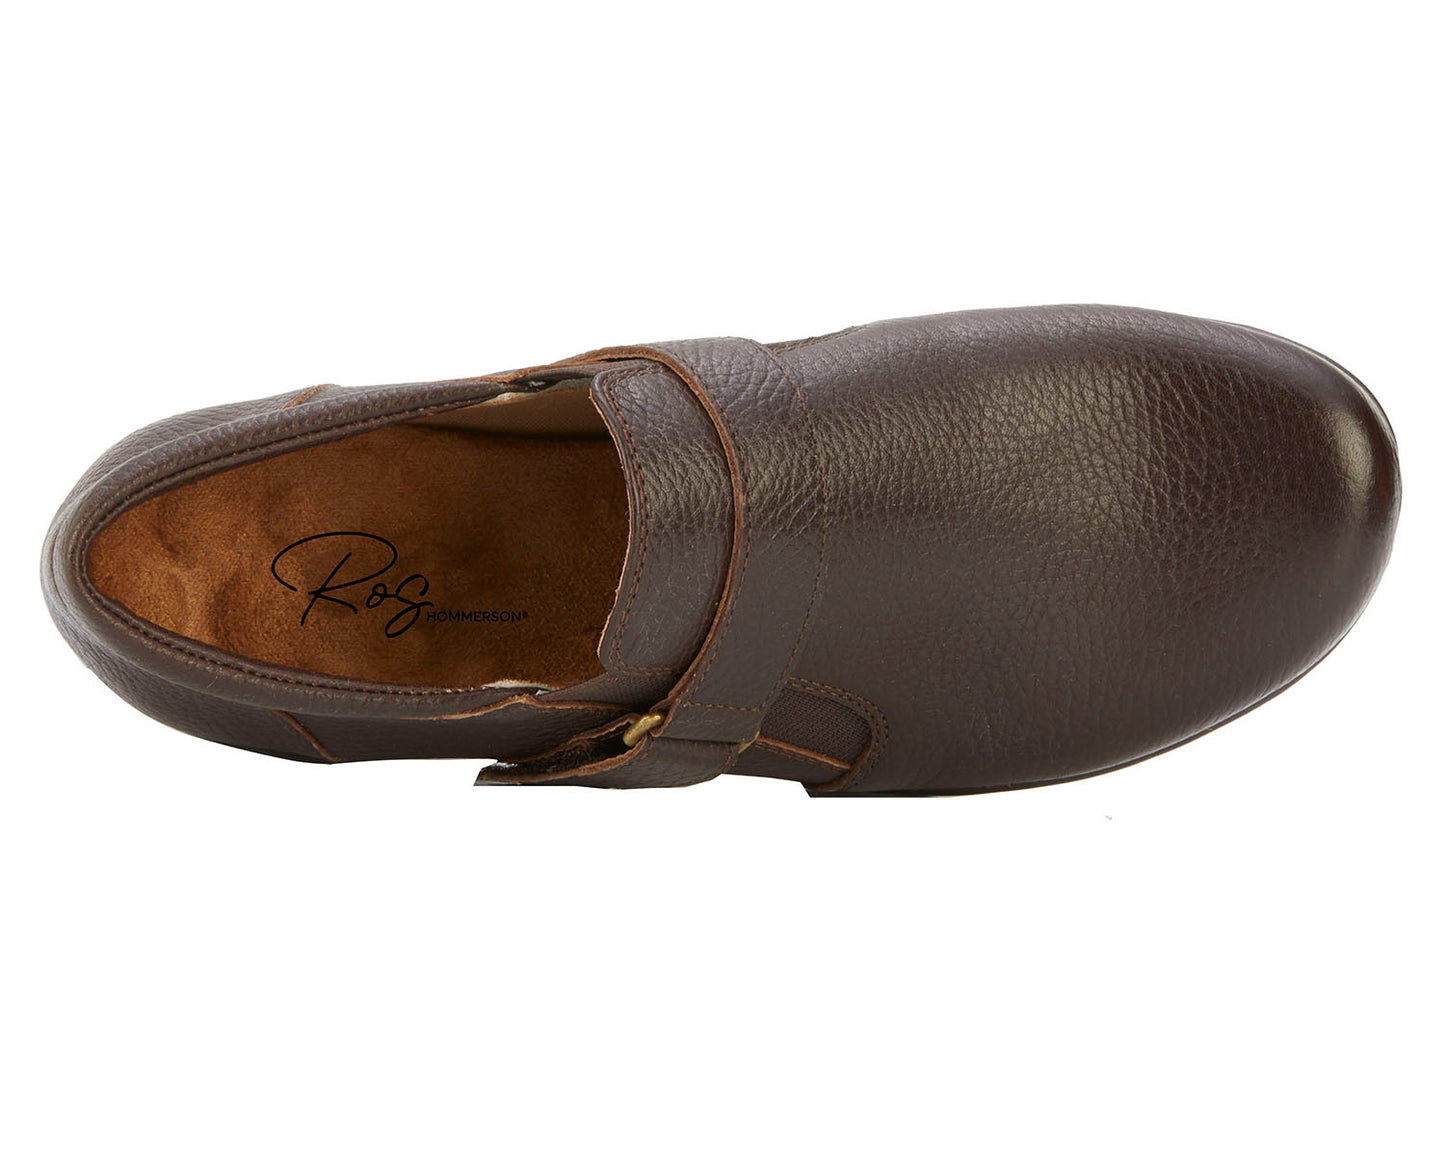 Ros - Eliot - Brown Leather